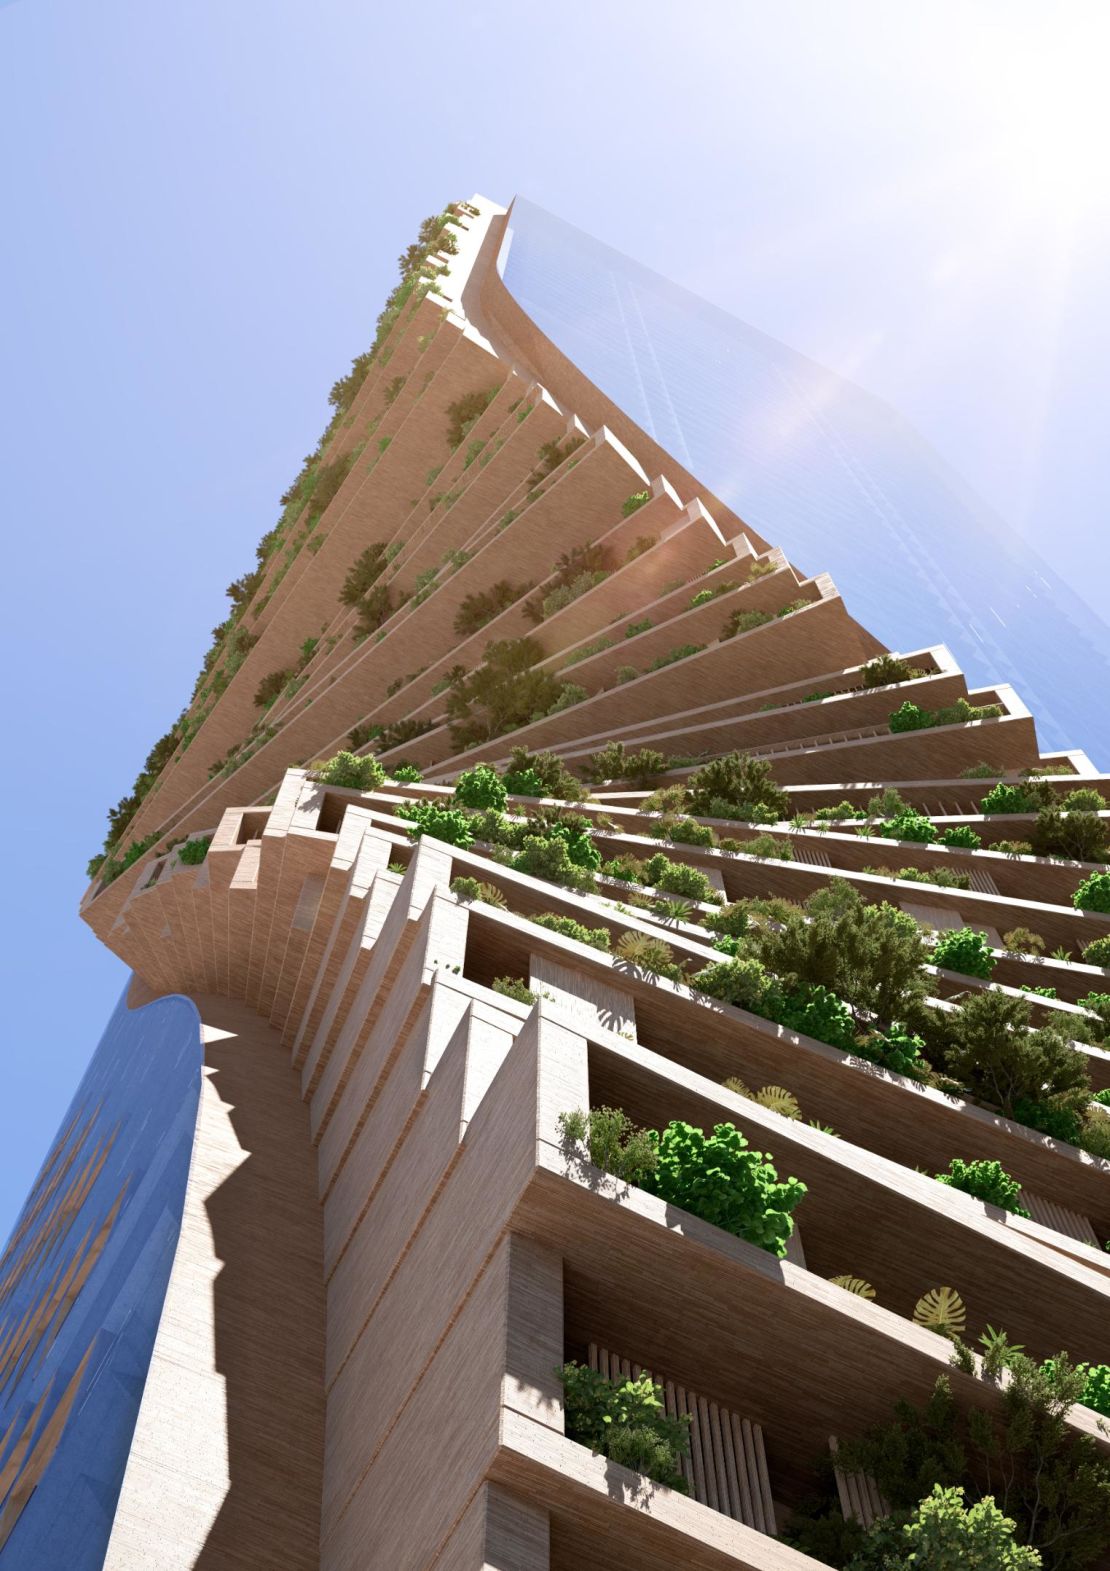 The tower's design features a twisting "spine" of balconies, terraces and gardens filled with trees and foliage.
